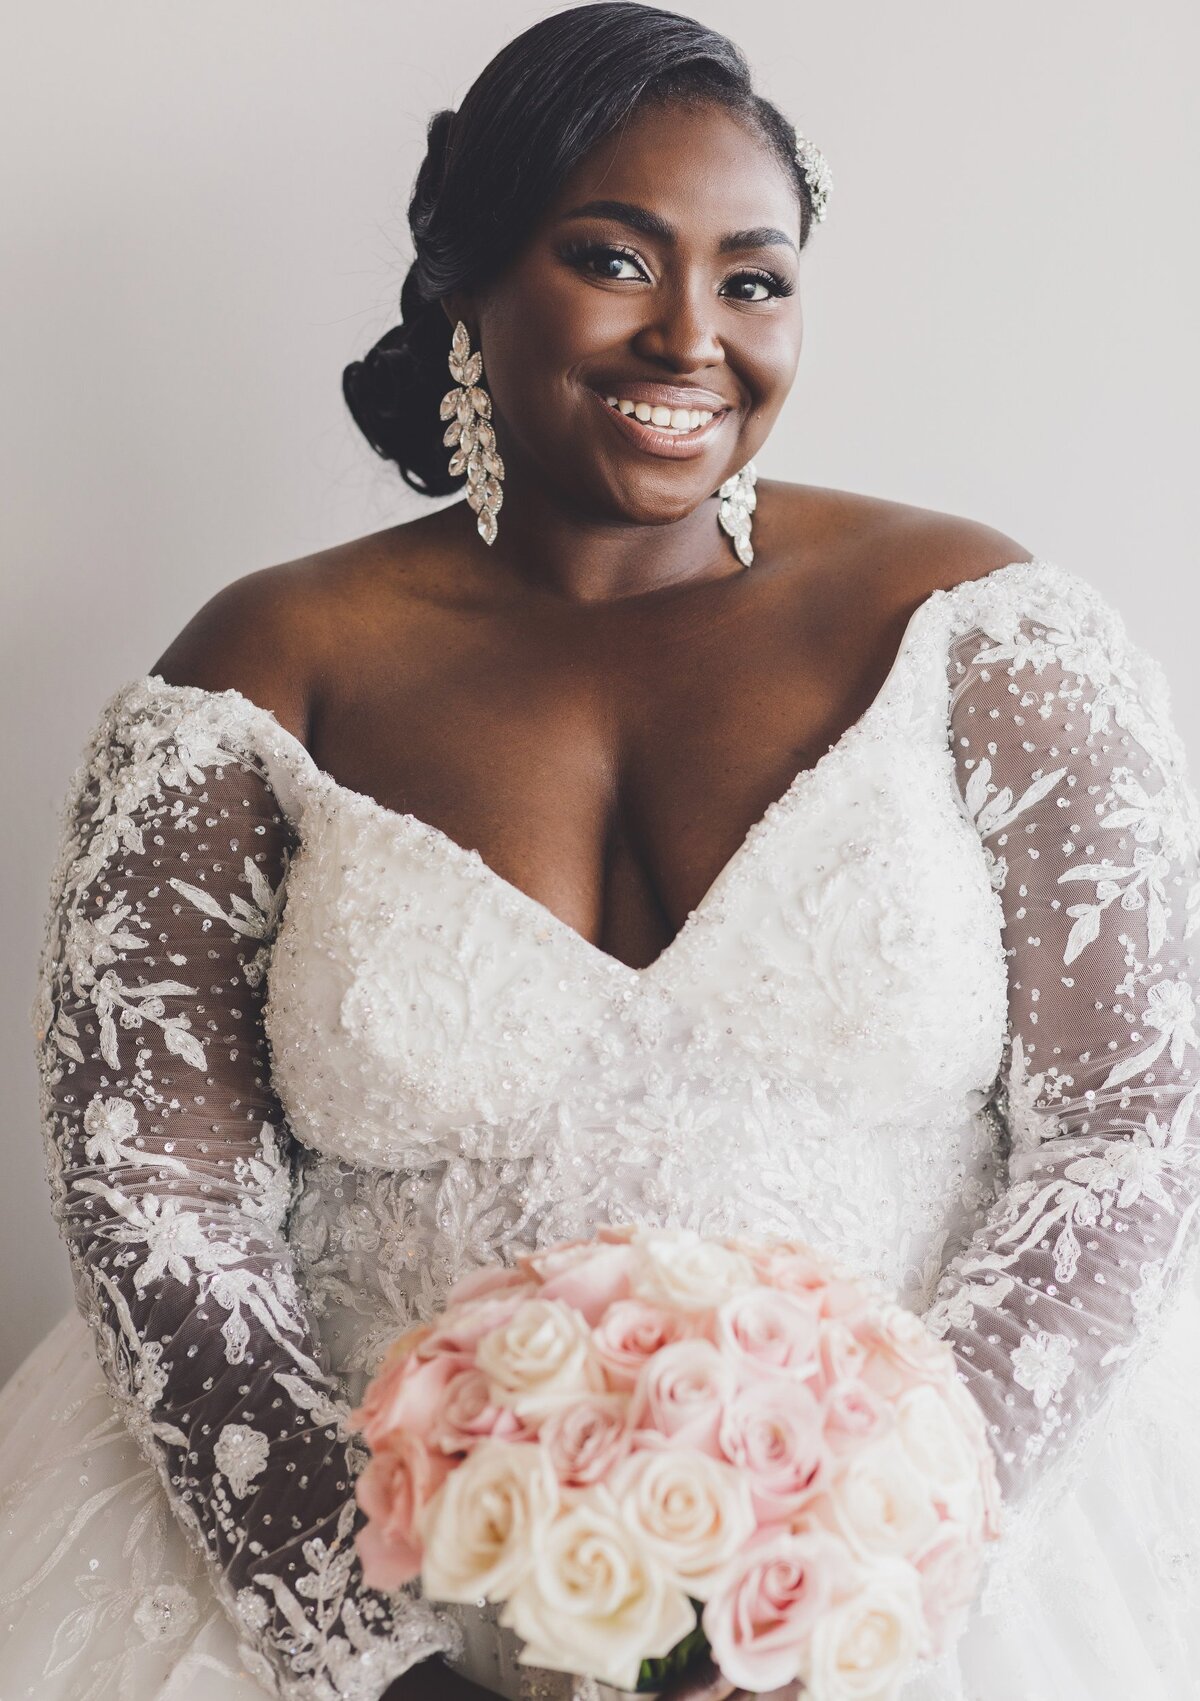 Portrait of bride smiling before wedding in Cancun